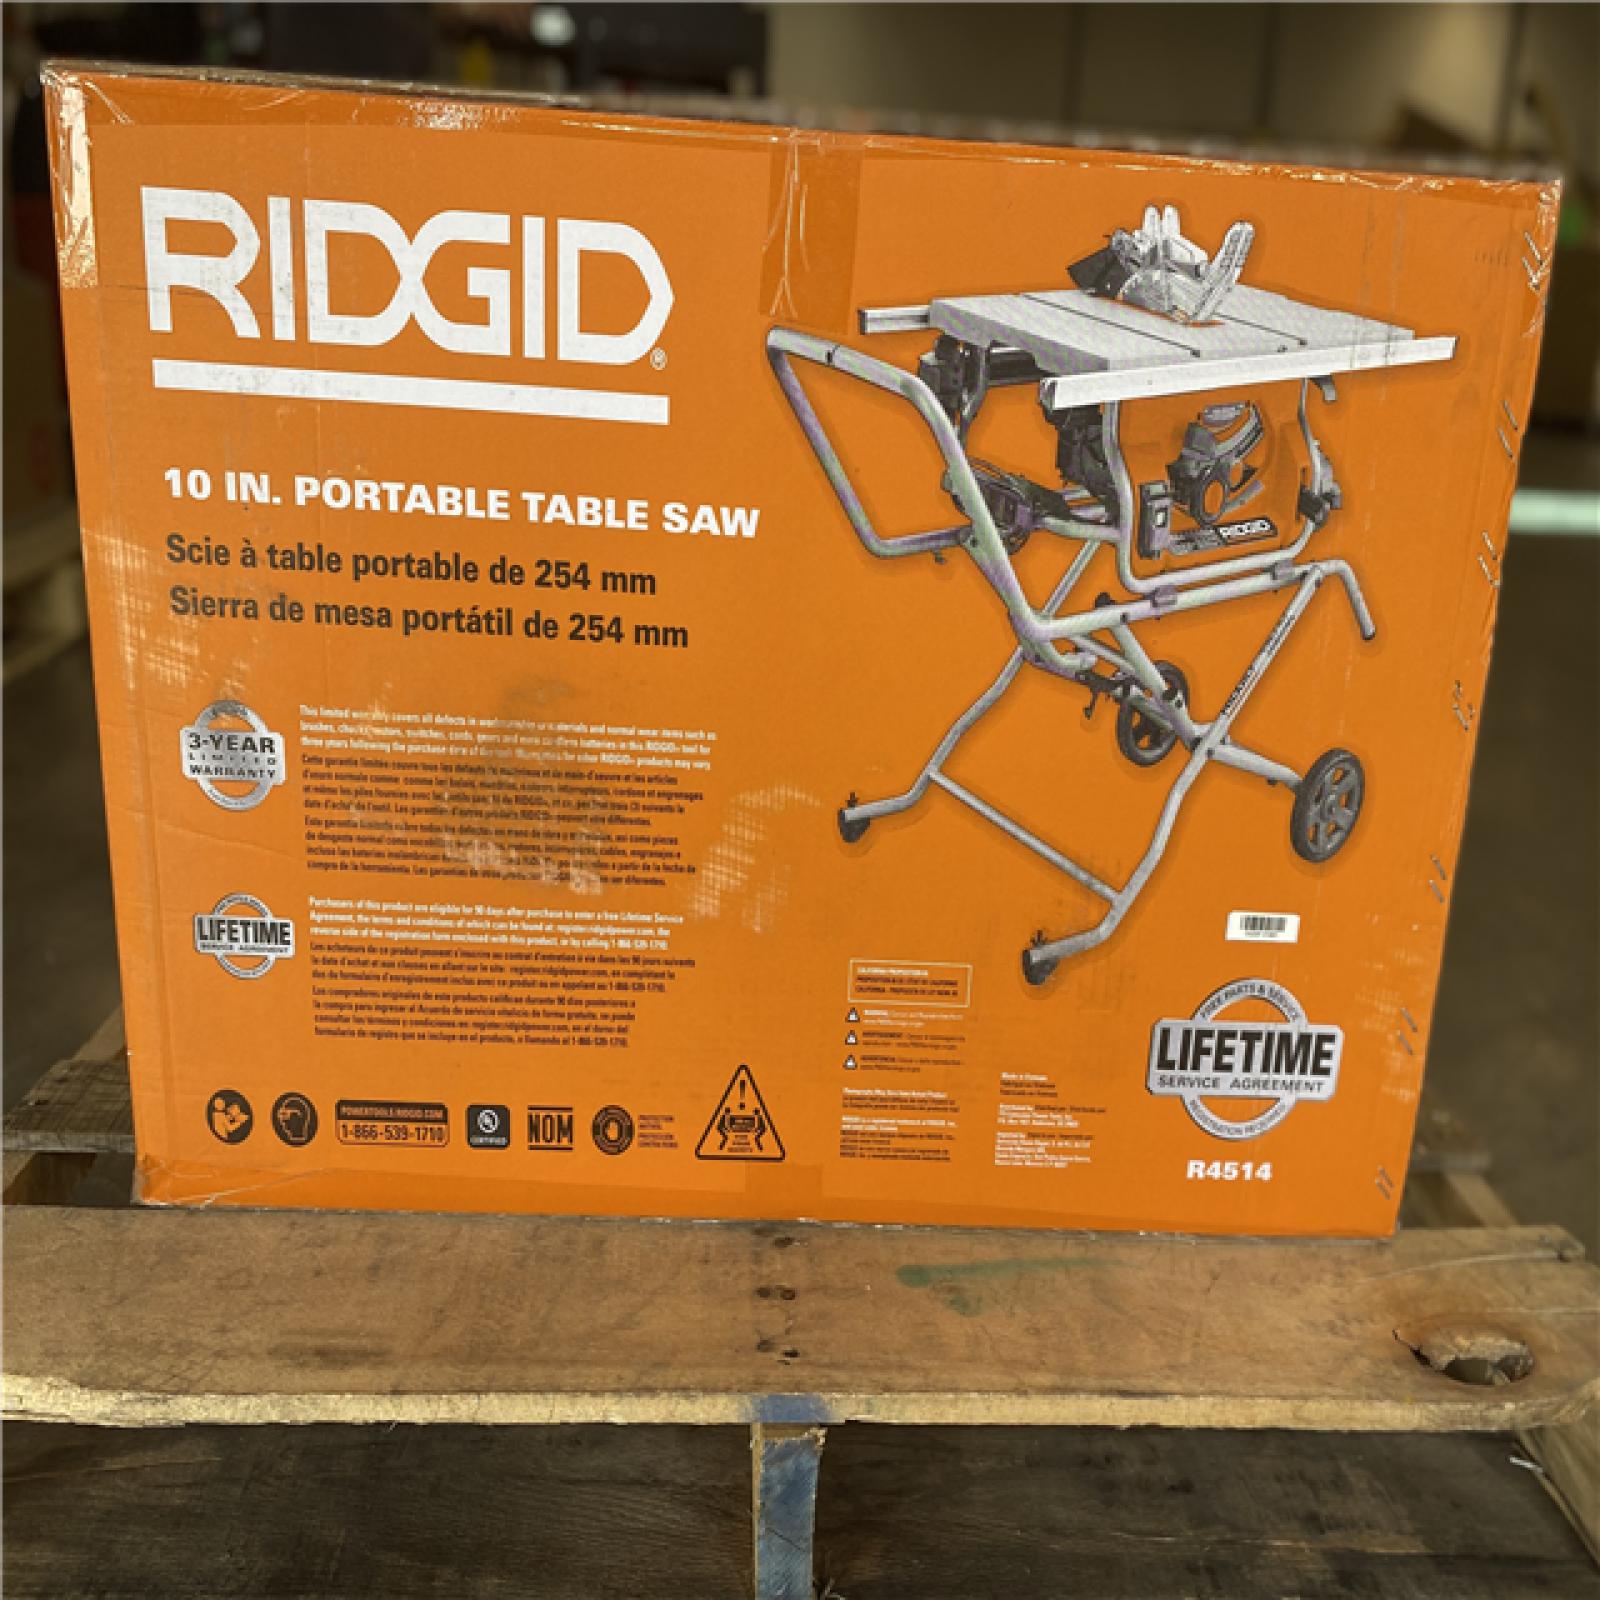 NEW! - RIDGID 15 Amp 10 in. Portable Corded Pro Jobsite Table Saw with Stand